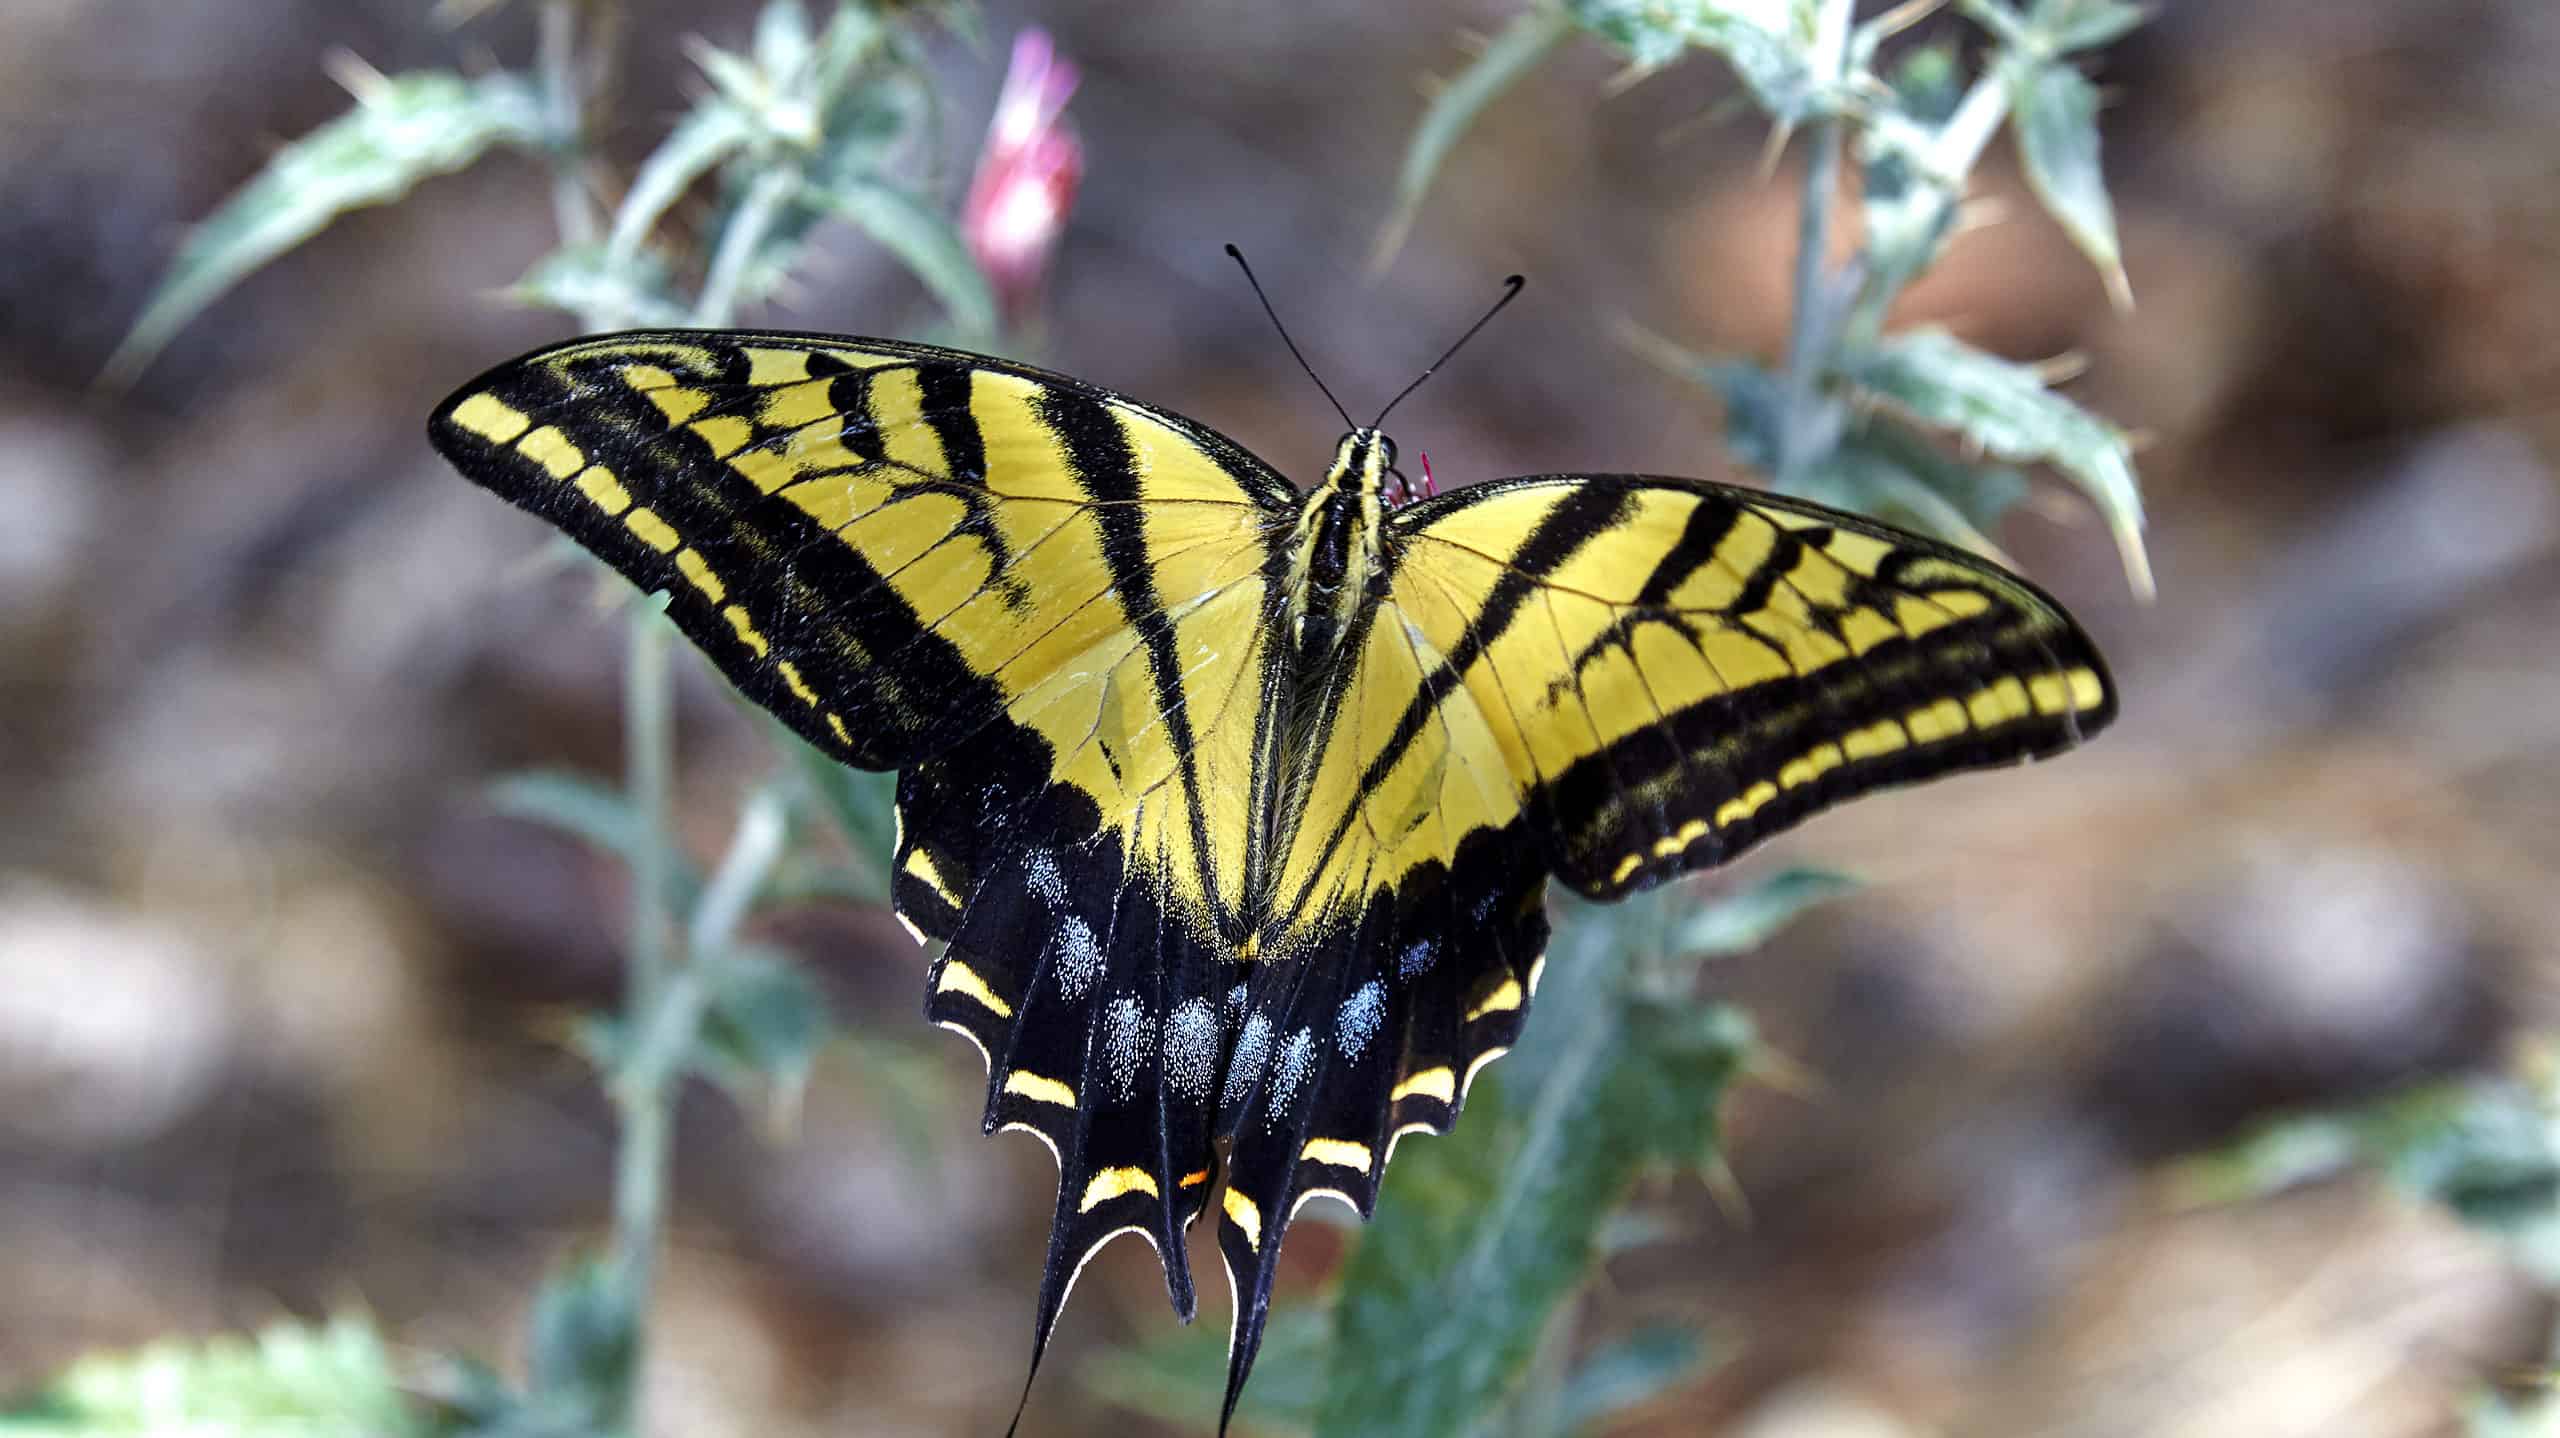 Two-tailed swallowtail butterfly collecting nectar from flower